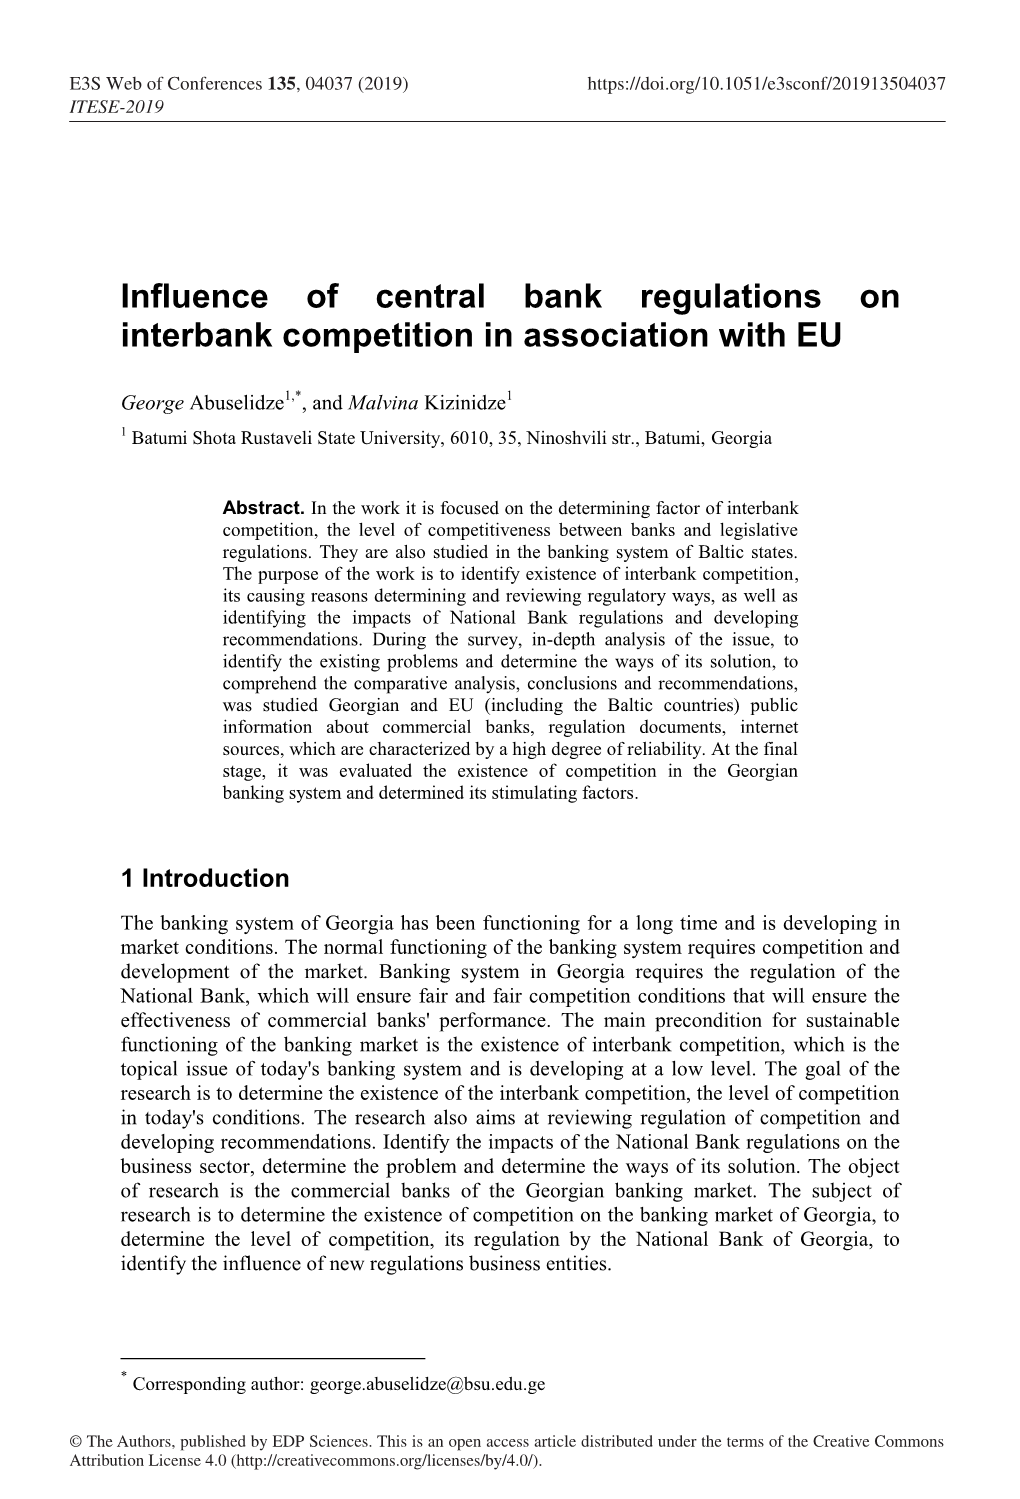 Influence of Central Bank Regulations on Interbank Competition in Association with EU